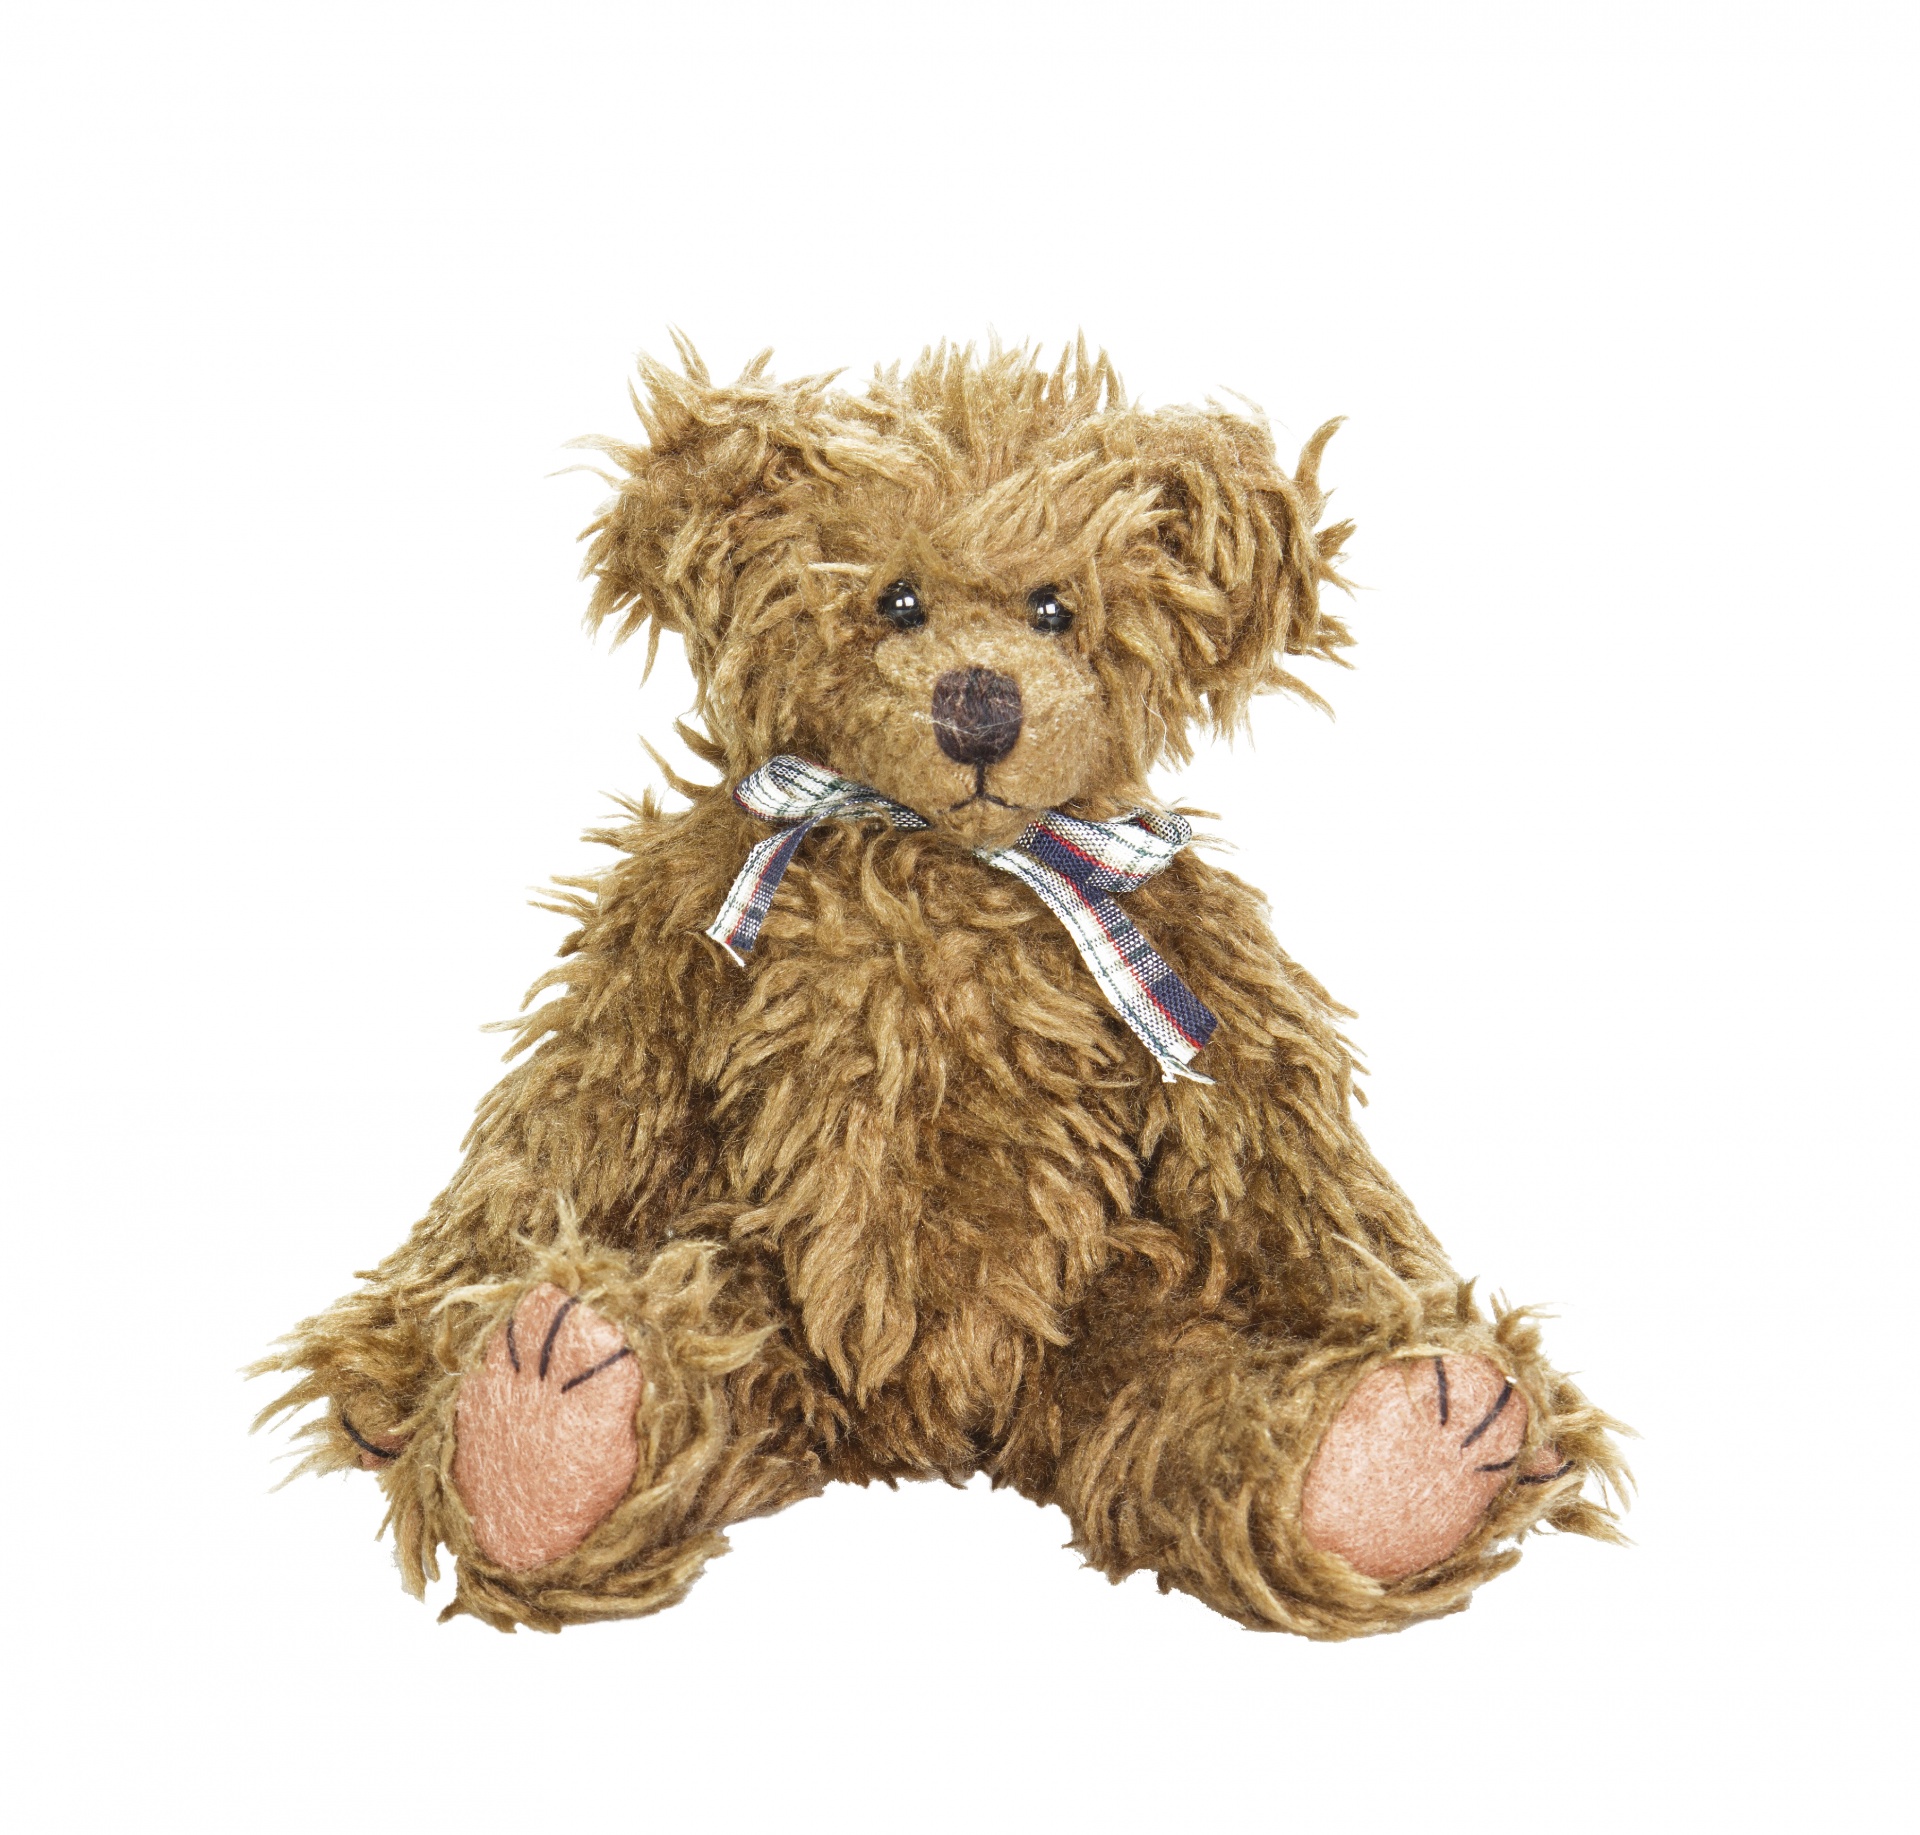 Cute scruffy vintage teddy bear clipart isolated on white background